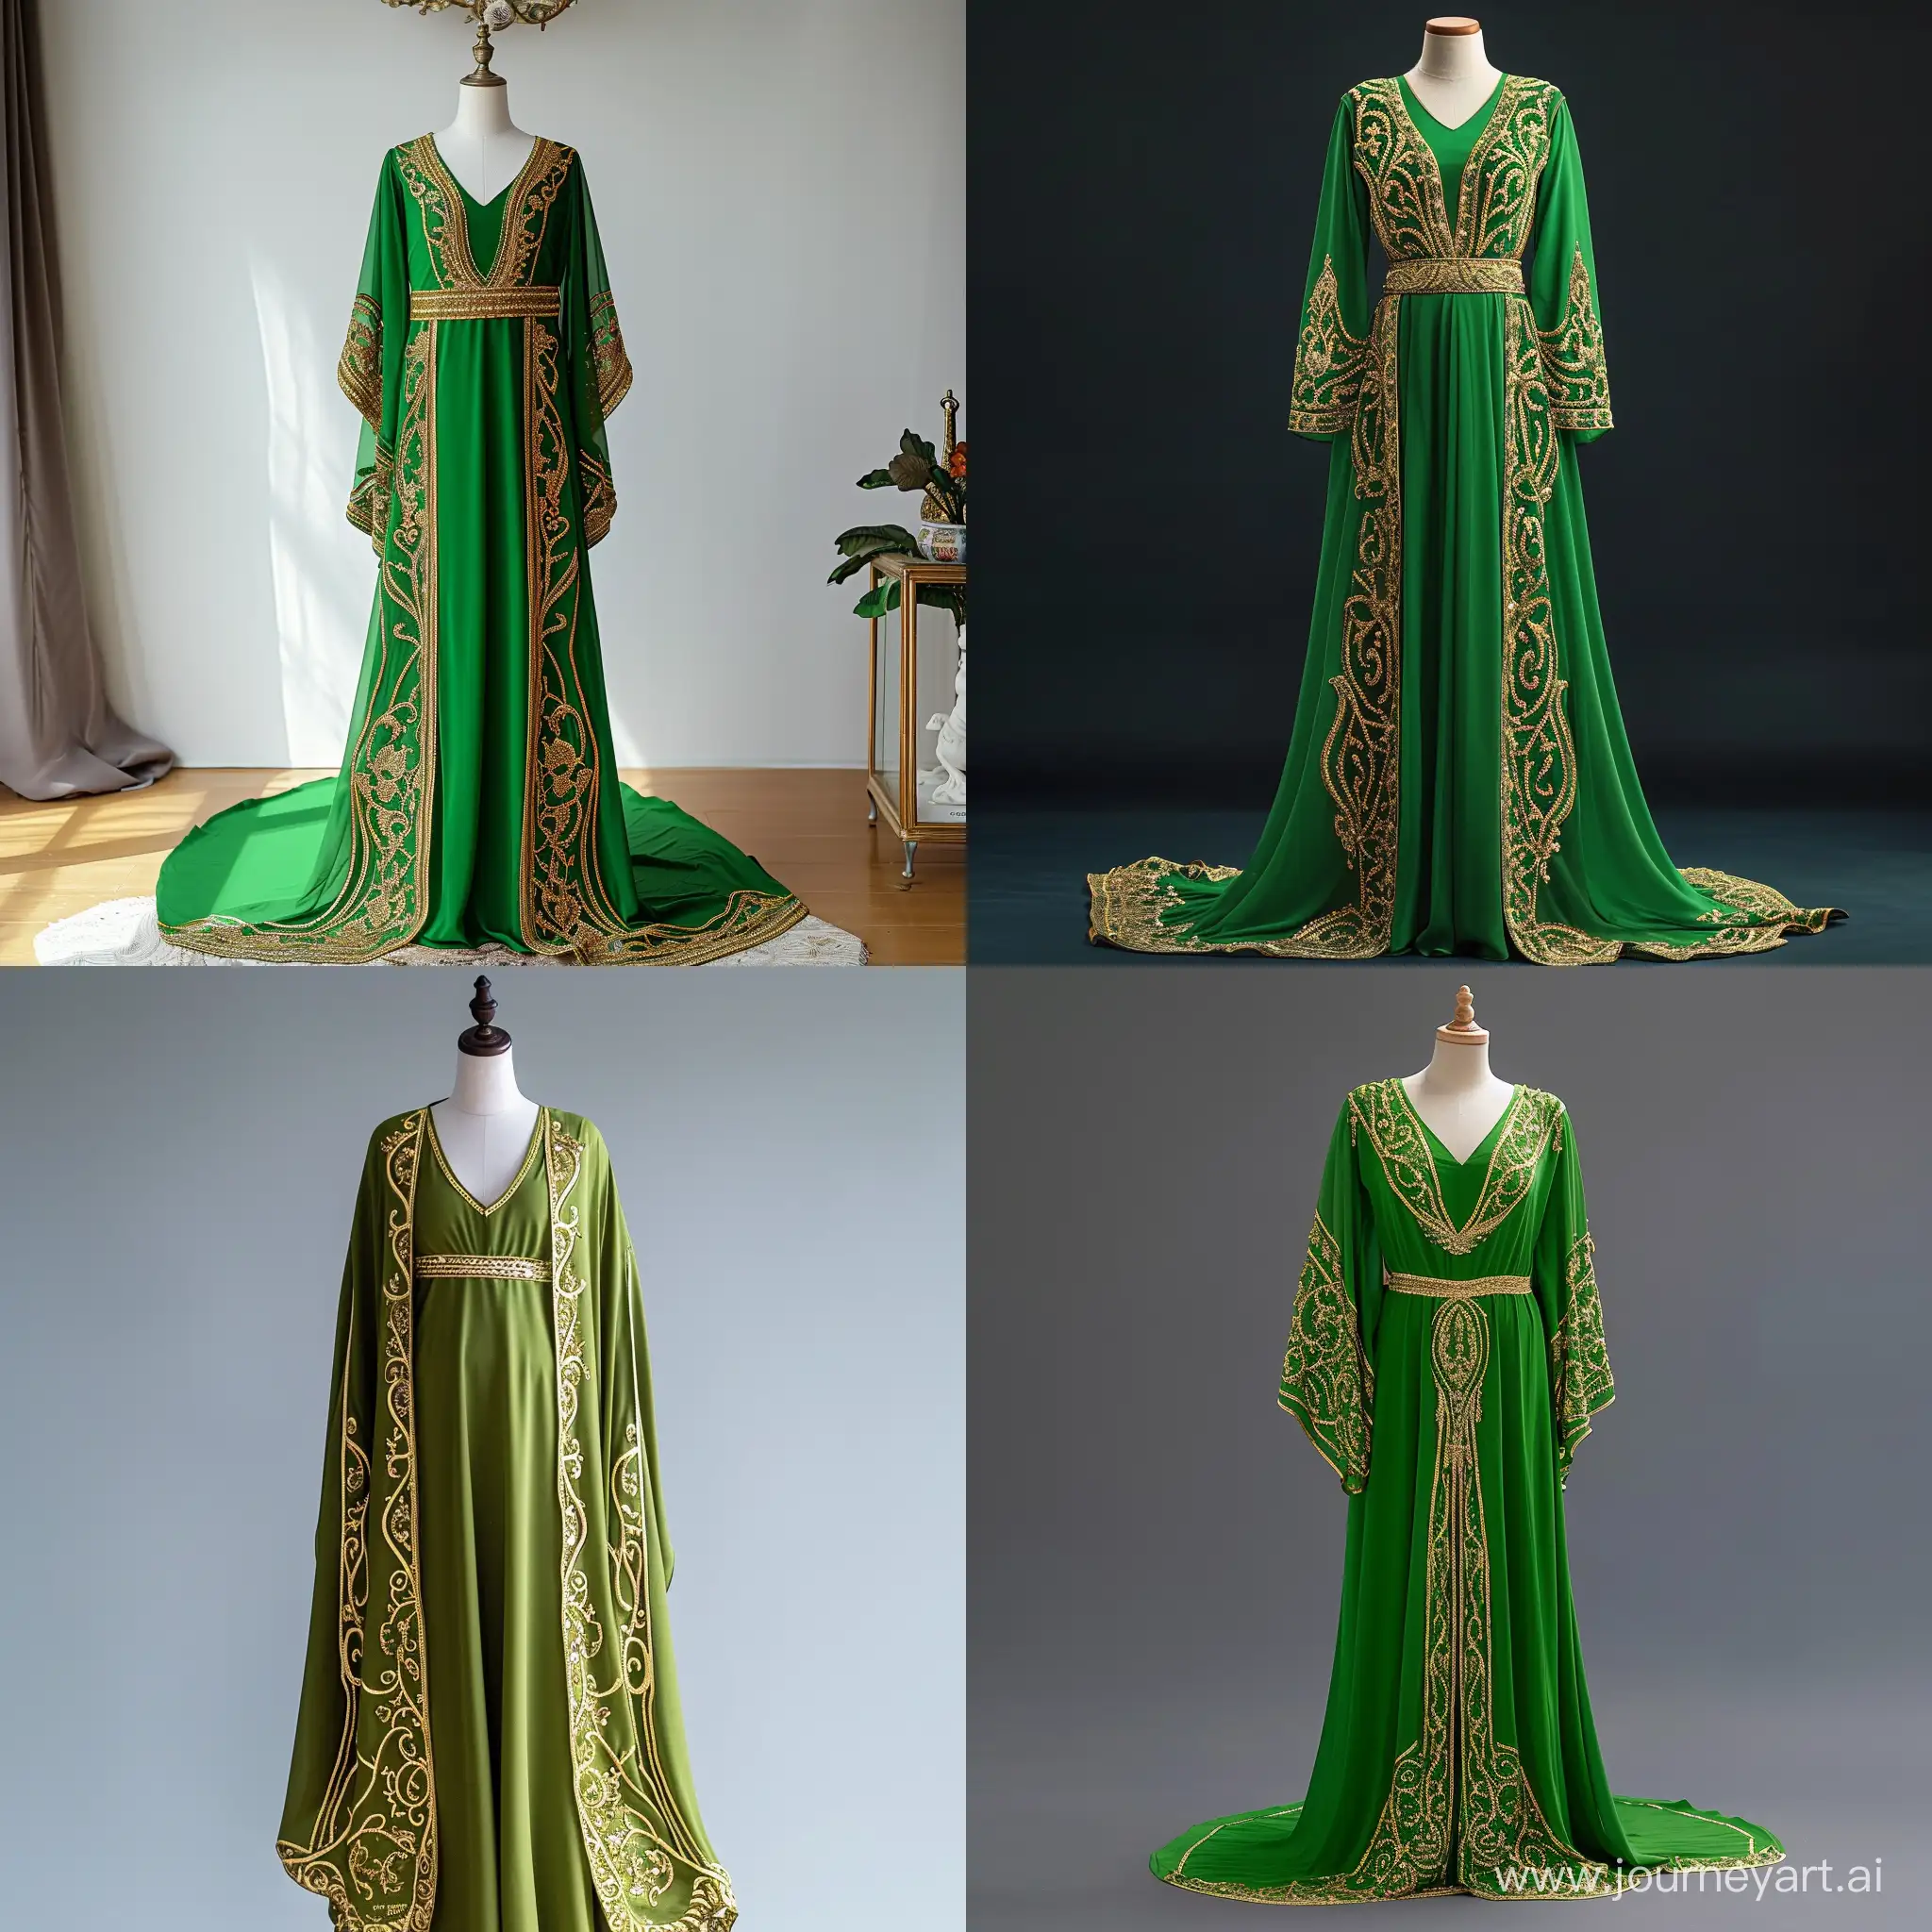 a beautiful green caftan with intricate golden embroidery, displayed on a mannequin. The caftan is long and flows down gracefully, giving it an elegant appearance. The golden embroidery is intricate and detailed, adorning the borders, waistline, and extending down the length of the caftan. The caftan has a V-neck design which is also outlined by the golden embroidery. It appears to be made of a glossy material that gives it a luxurious look. The waistline is accentuated by an embroidered belt-like design that adds to its elegance